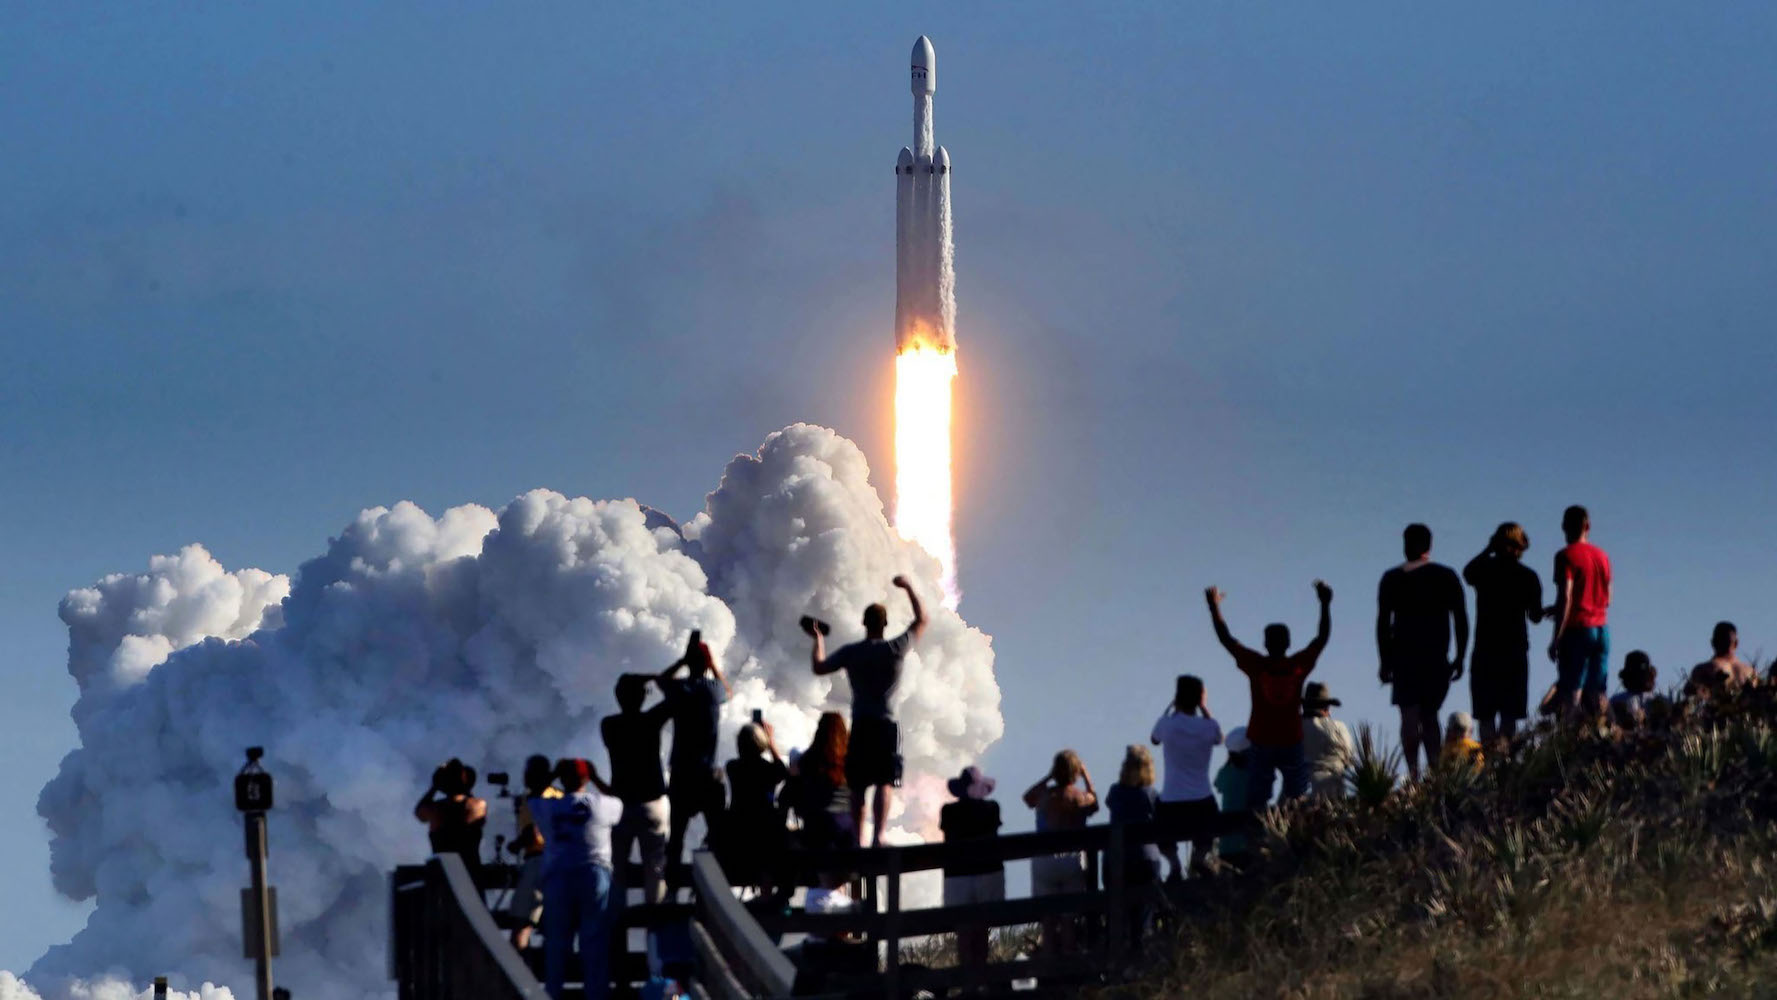 Space tech predictions, startup IP strategy, finding feasible funding • TechCrunch